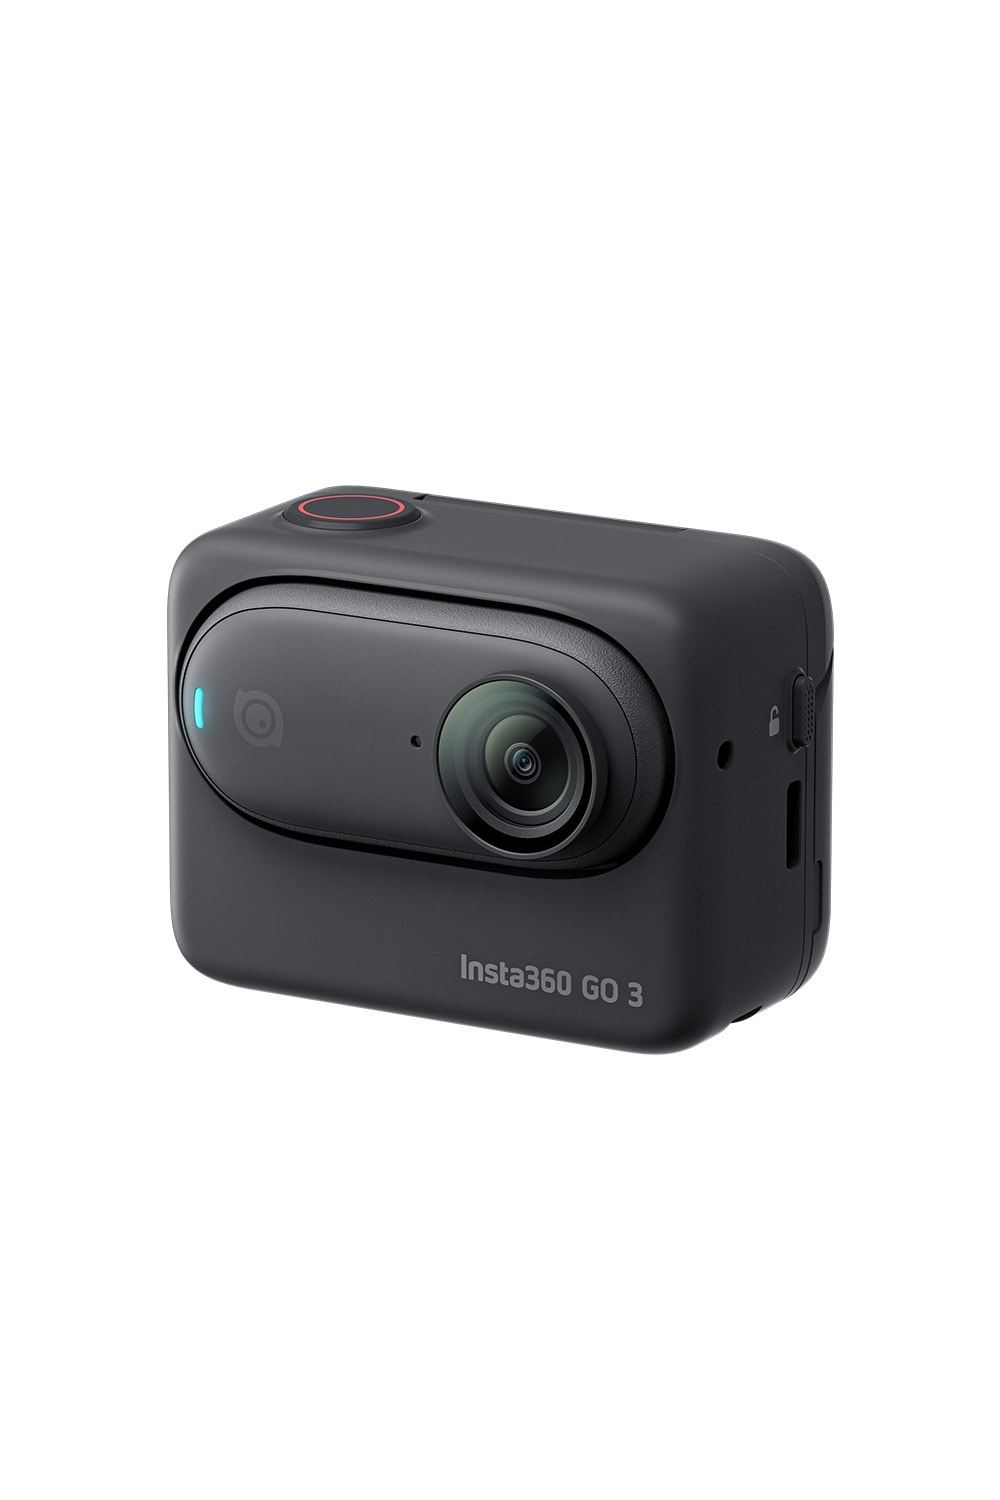 Insta360's Tiny 2.7K GO 3 Action Camera is Now Available in Black